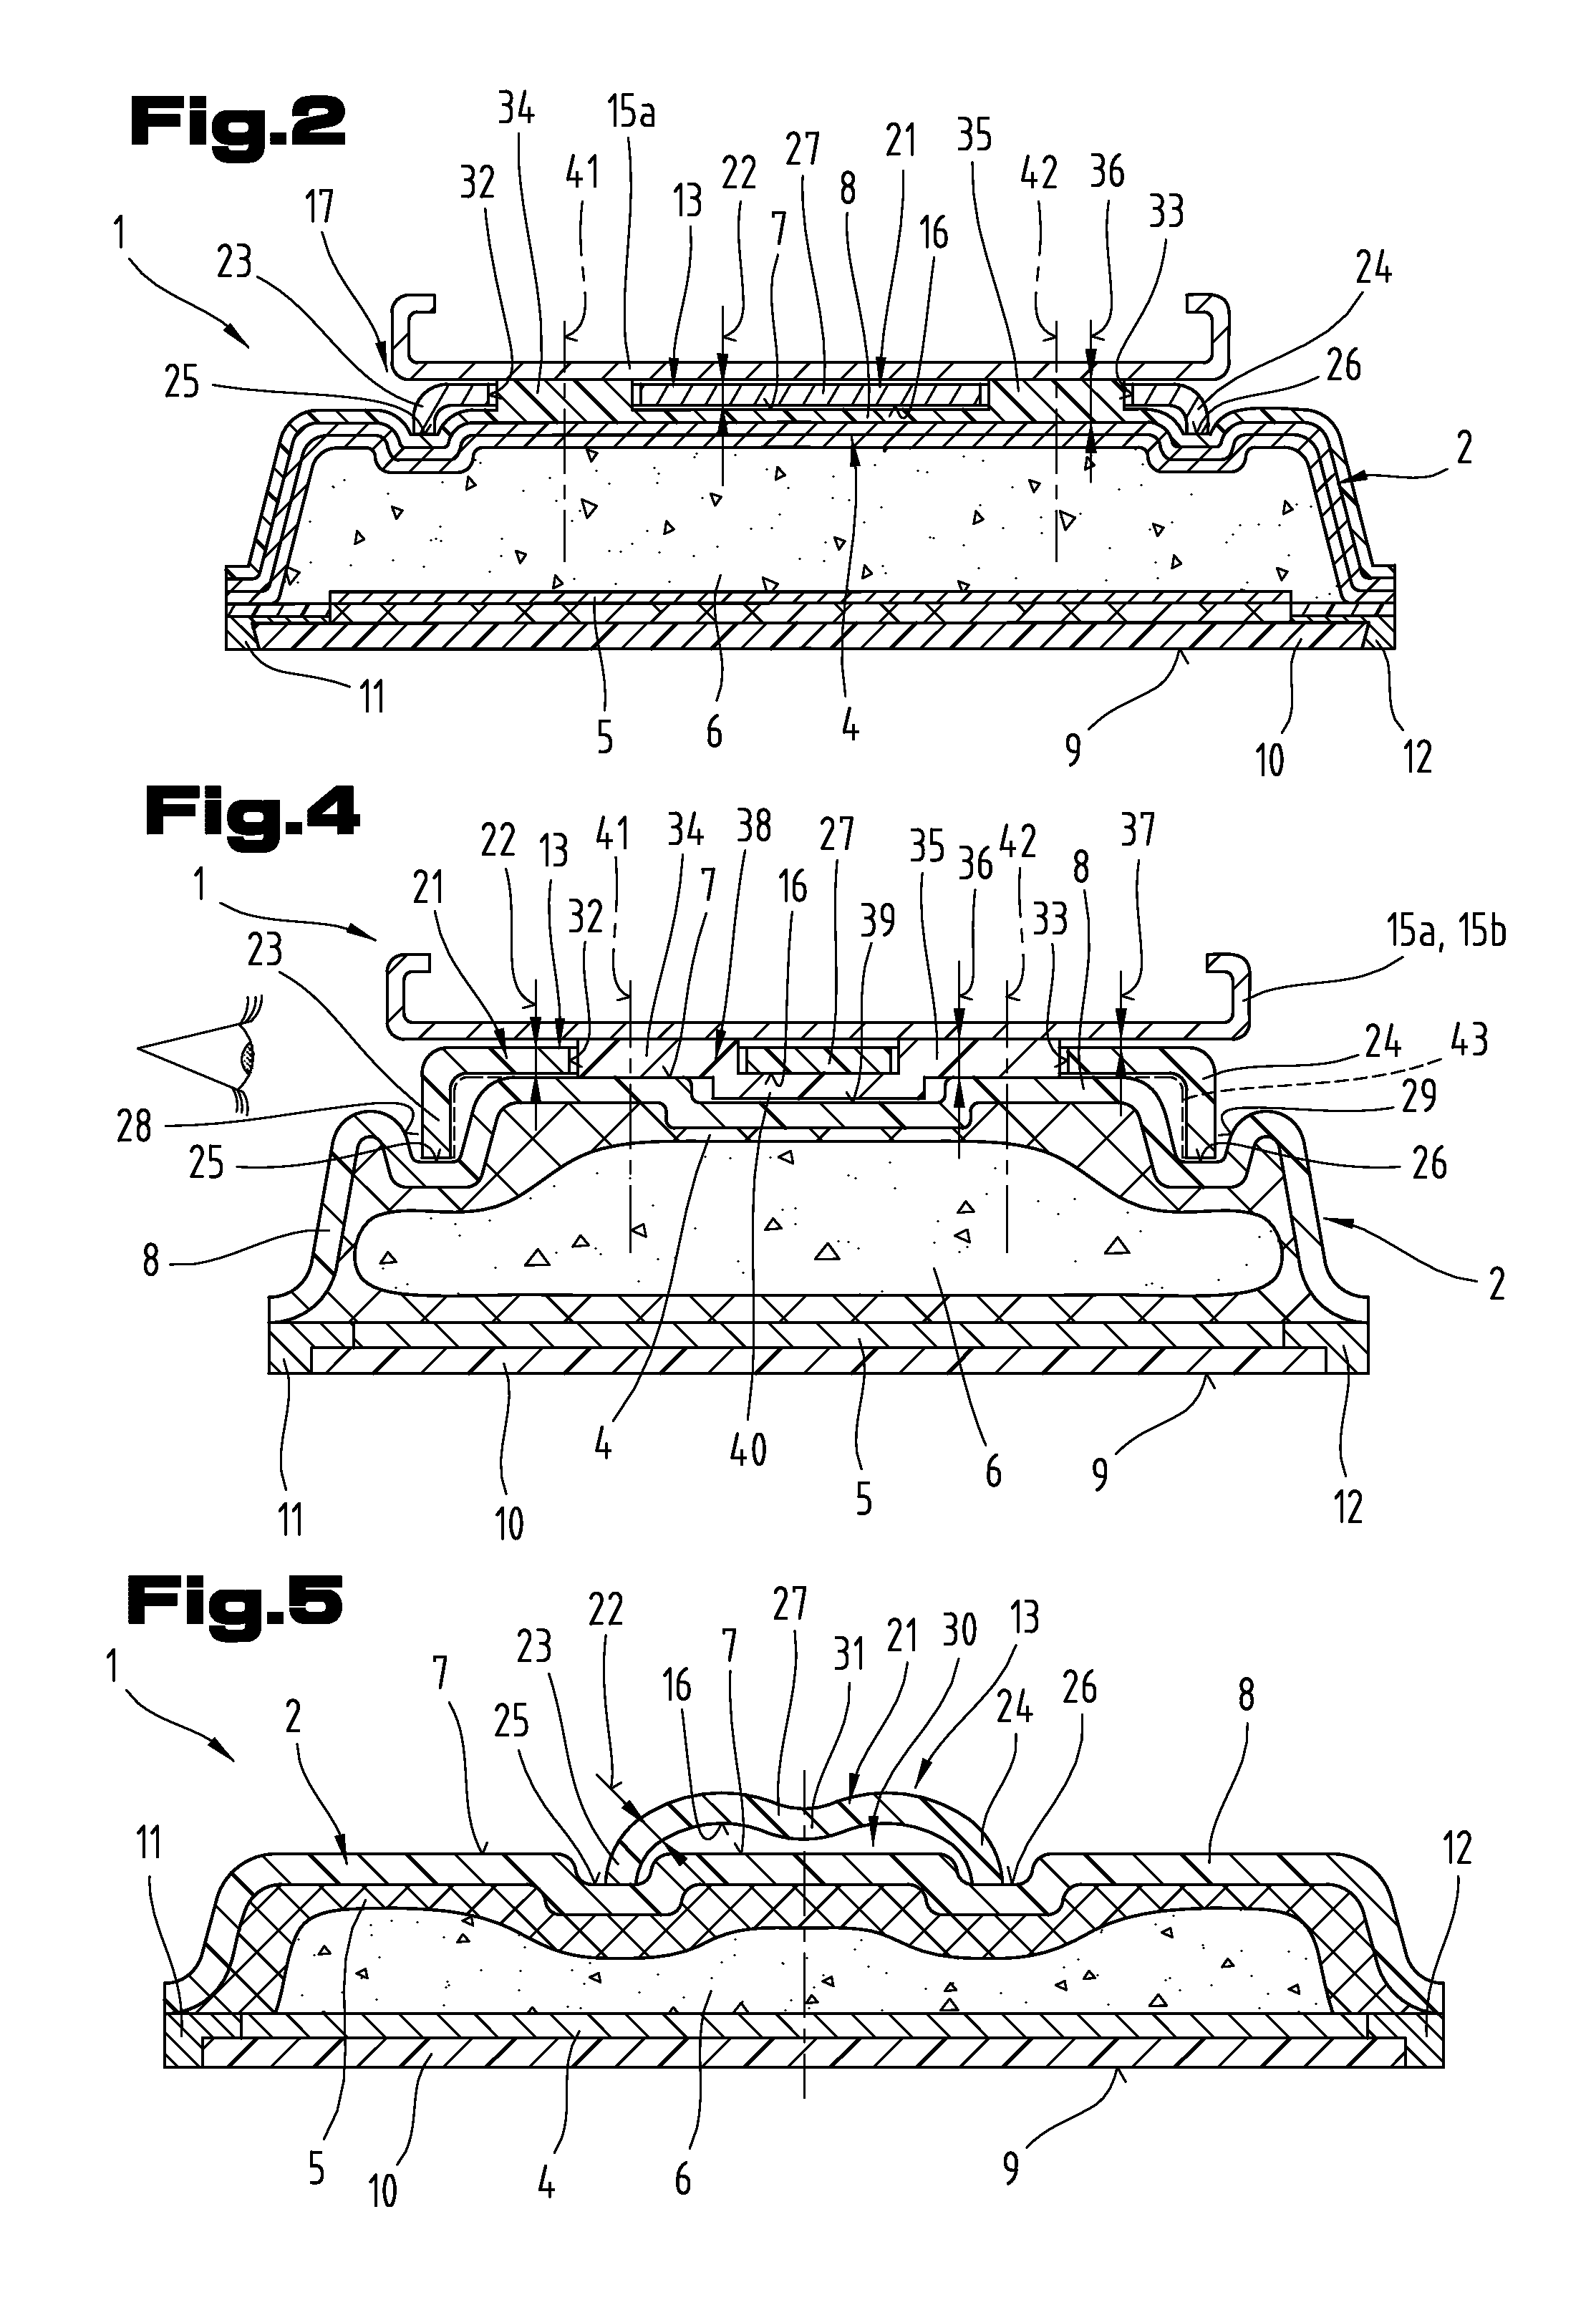 Board-like sliding device in the form of a ski or snowboard